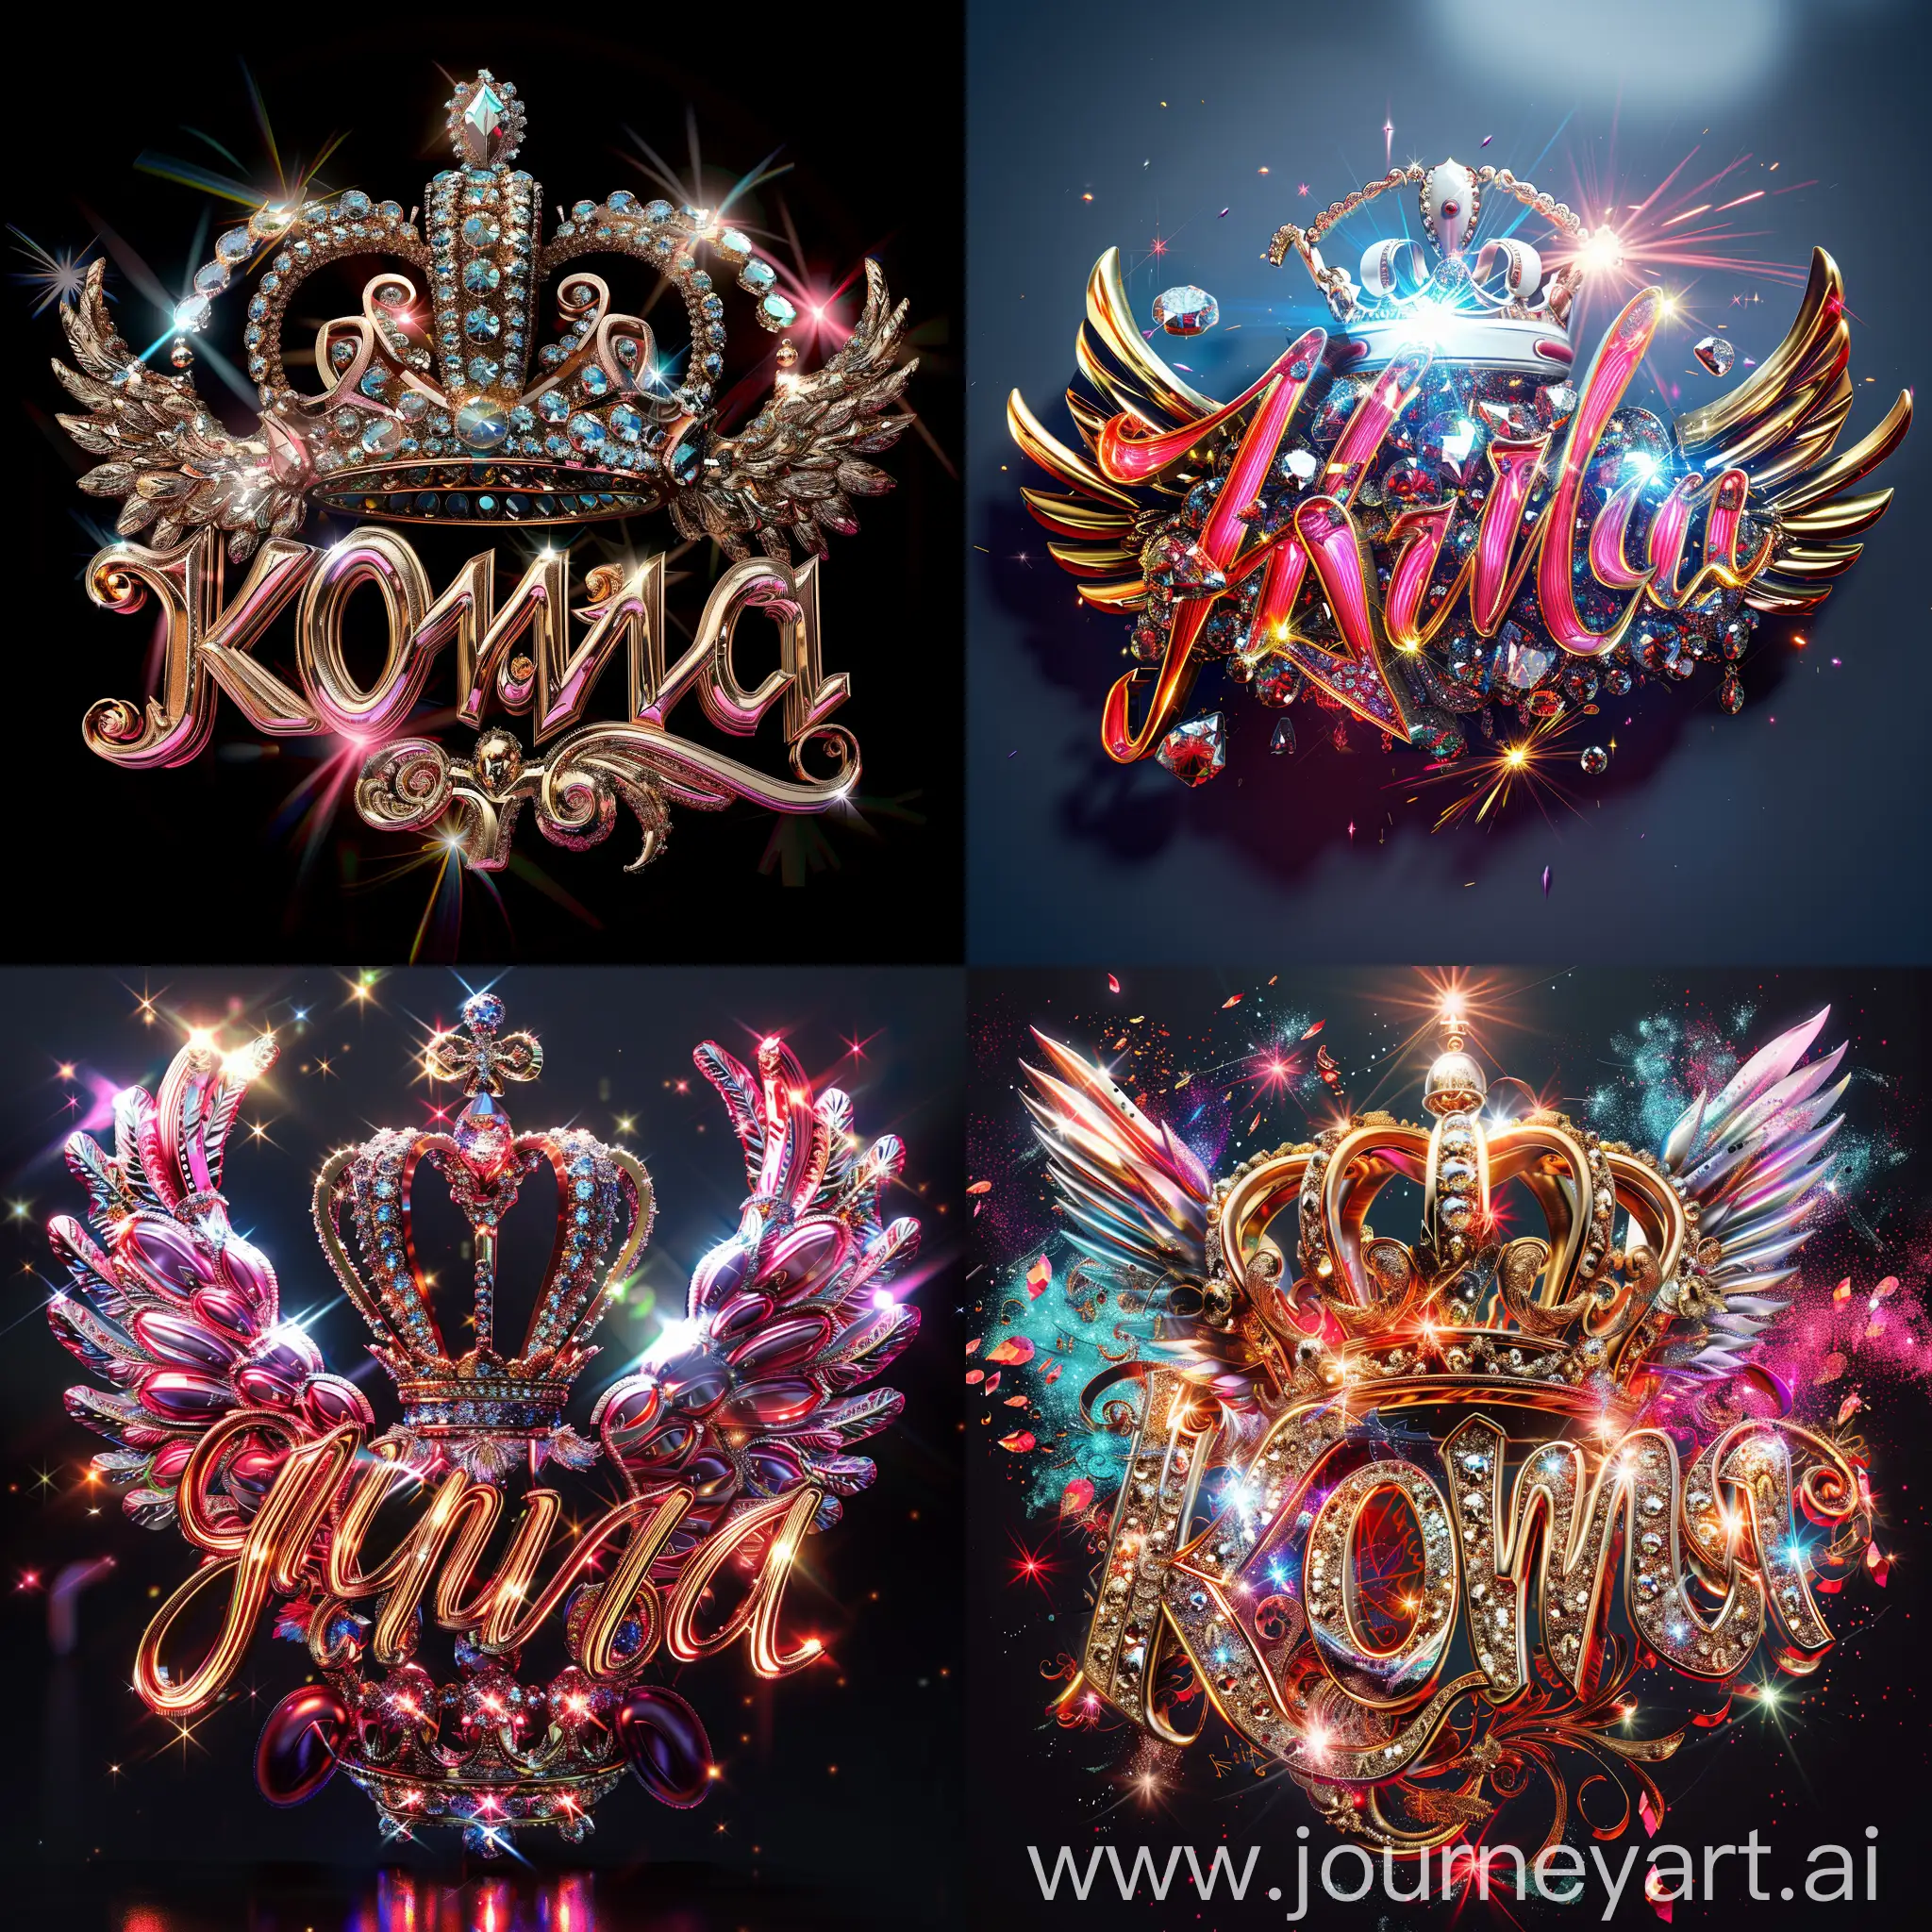 Elegant 3D typography with the name. "KONE FATIMA LALIBANAISE" with an elegant crown and fine diamonds with sparkles of bright colors and angel wings, photo, typography, vibrantv0.1, graffiti, illustration, photo, product, fashion, poster